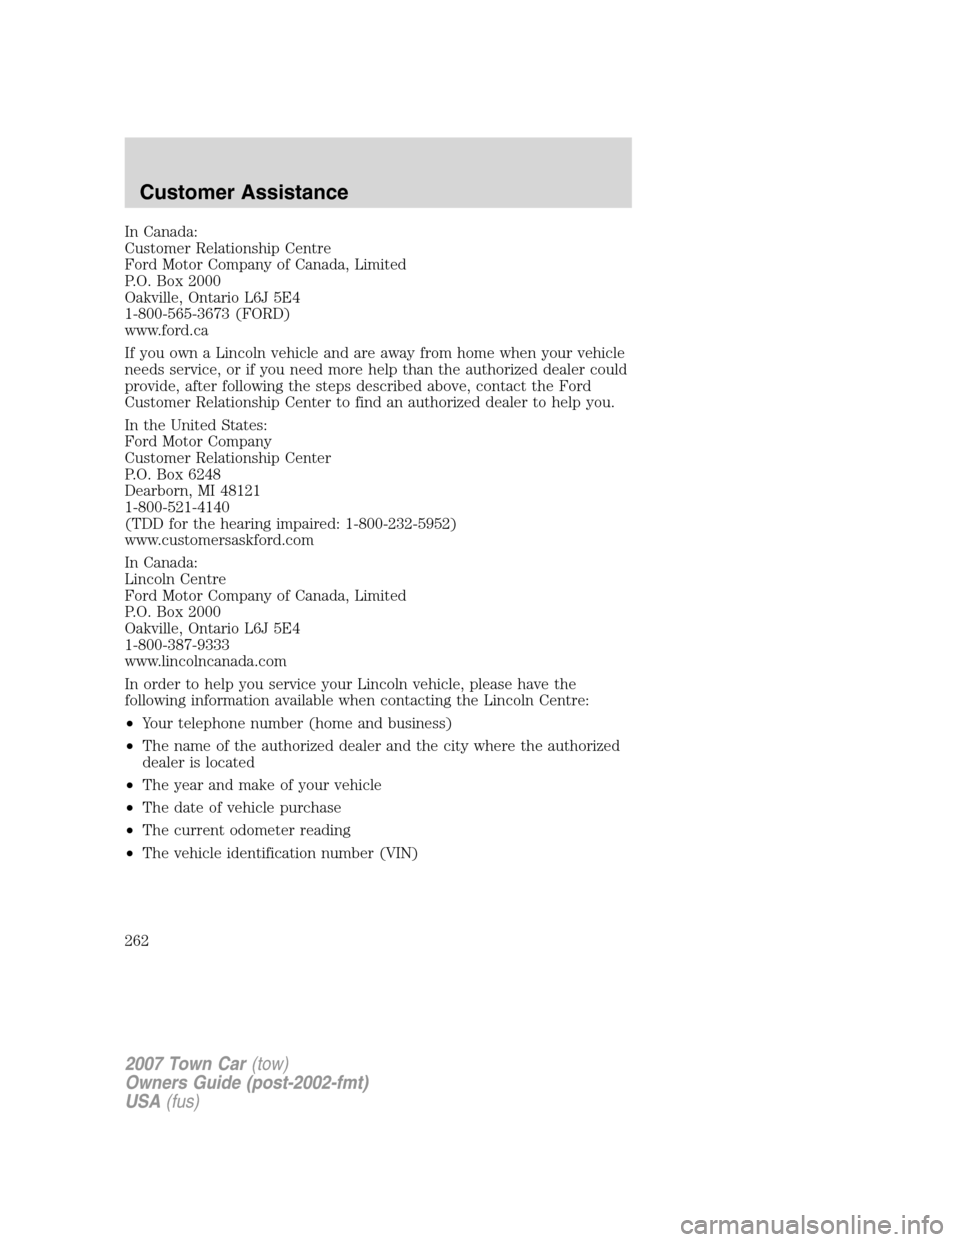 LINCOLN TOWN CAR 2007  Owners Manual In Canada:
Customer Relationship Centre
Ford Motor Company of Canada, Limited
P.O. Box 2000
Oakville, Ontario L6J 5E4
1-800-565-3673 (FORD)
www.ford.ca
If you own a Lincoln vehicle and are away from h